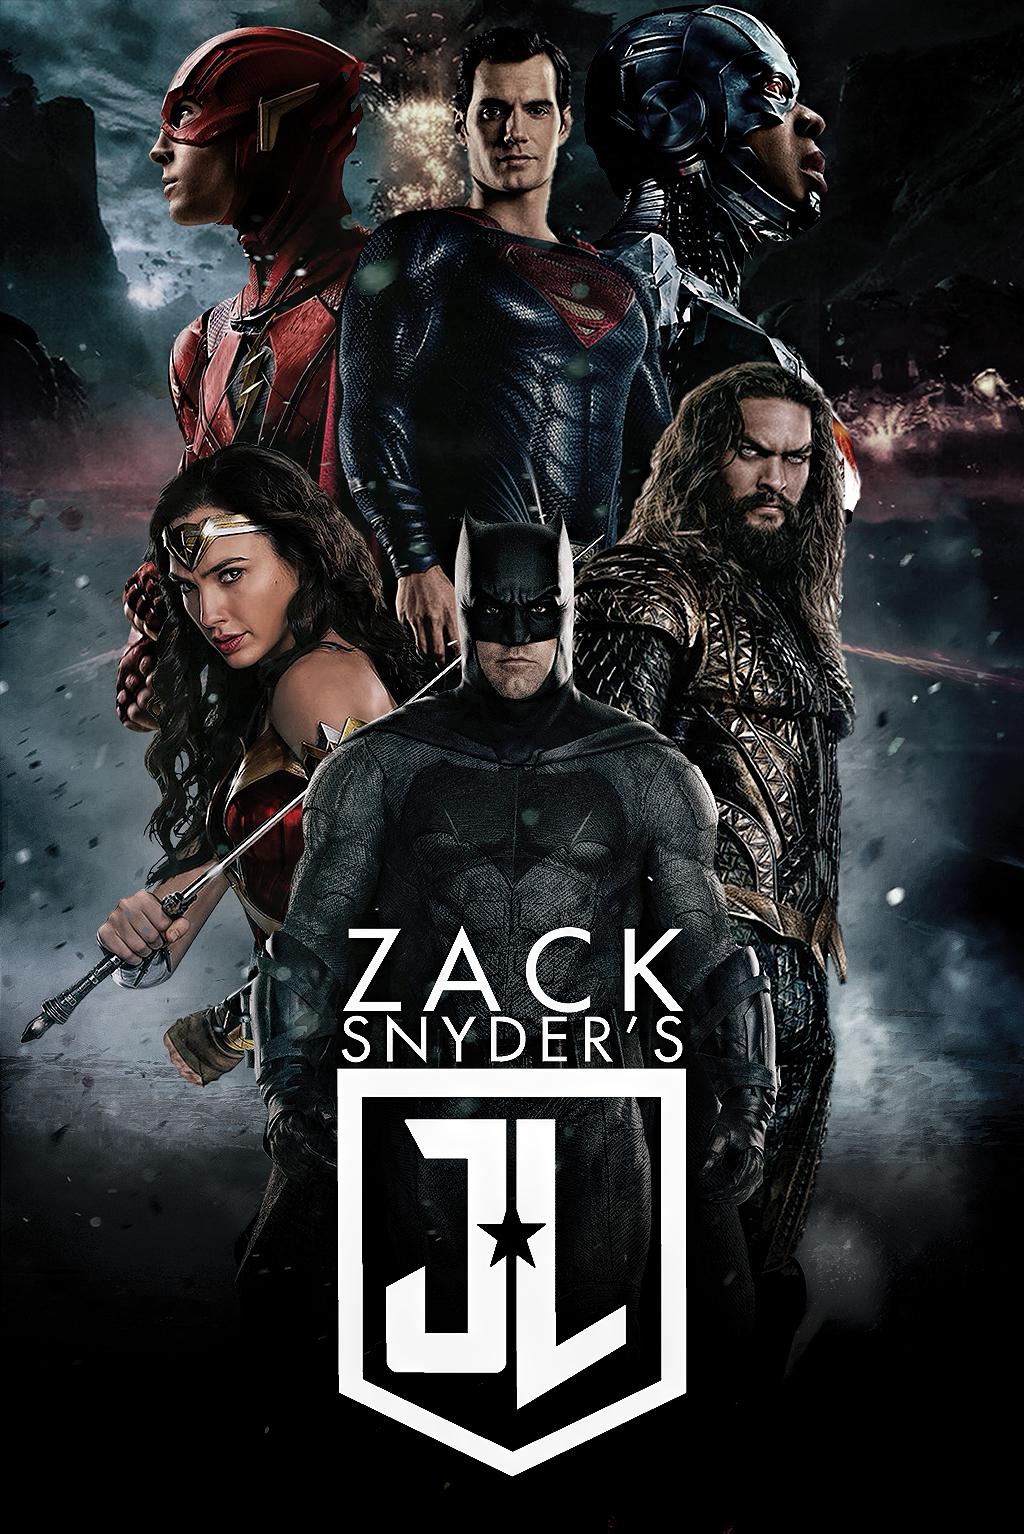 FAN MADE: My Submission For Zack Snyder's Justice League Fan Poster, DC_Cinematic